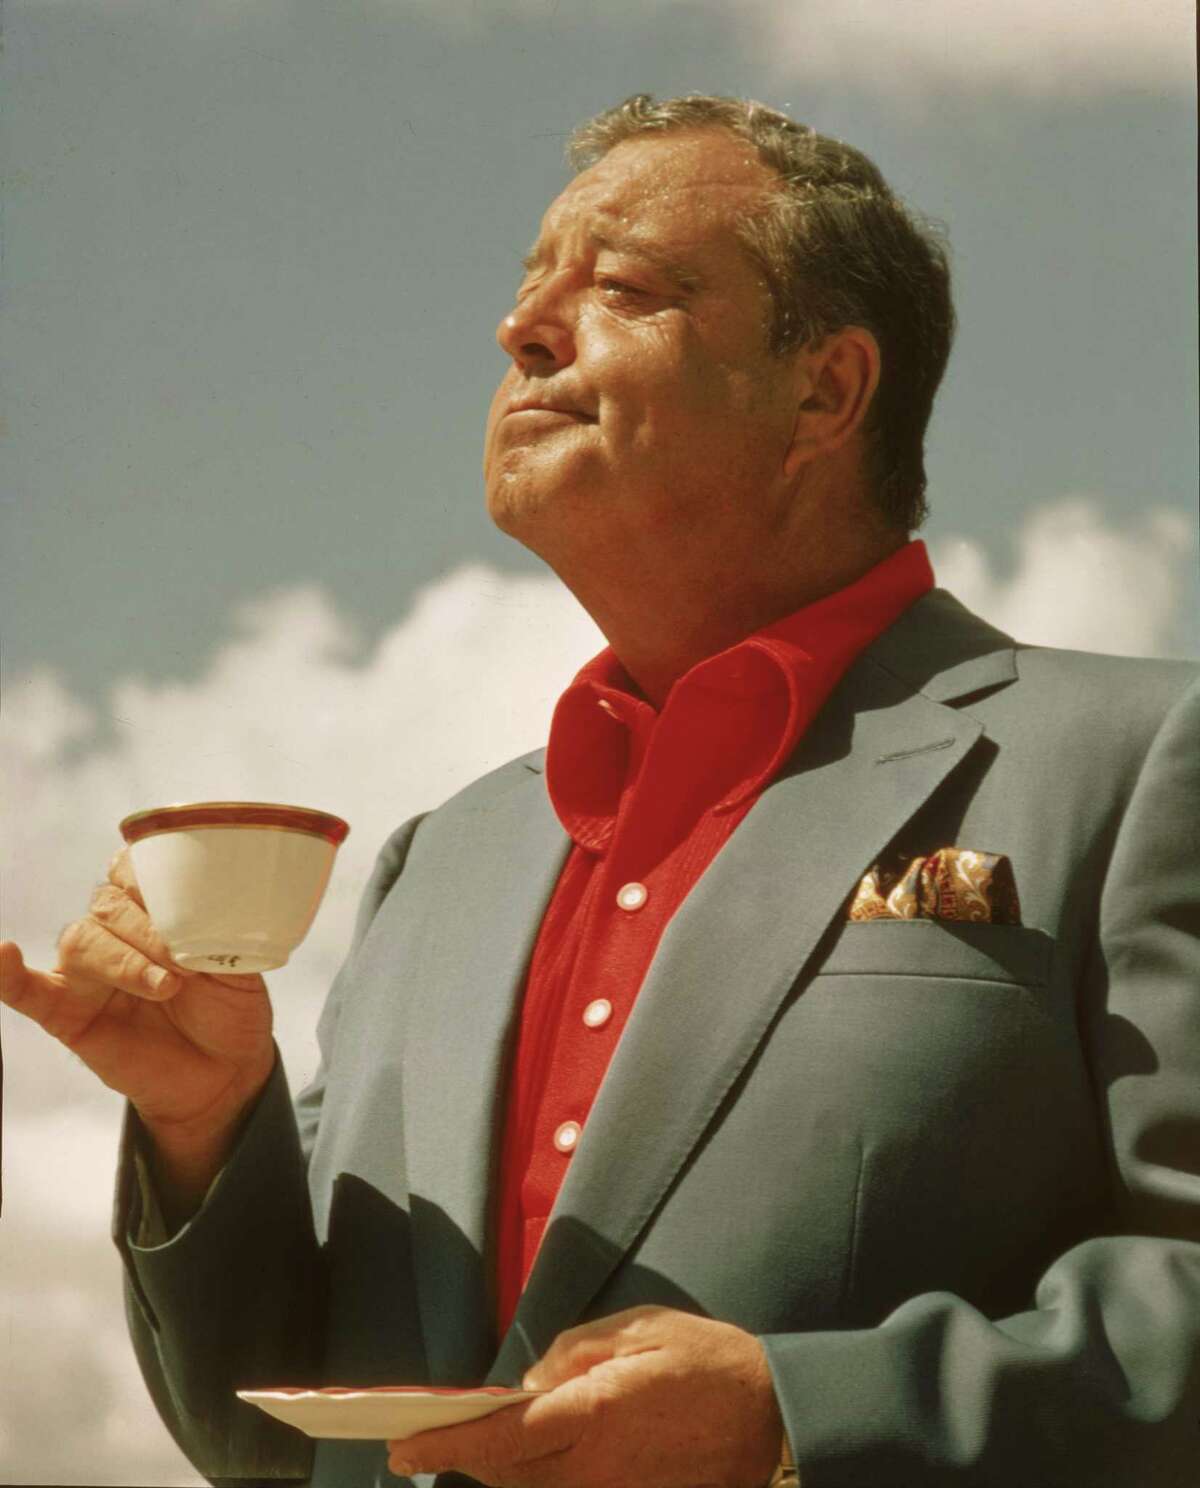 “How sweet it is,” was one of the frequent sayings of comedian Jackie Gleason.